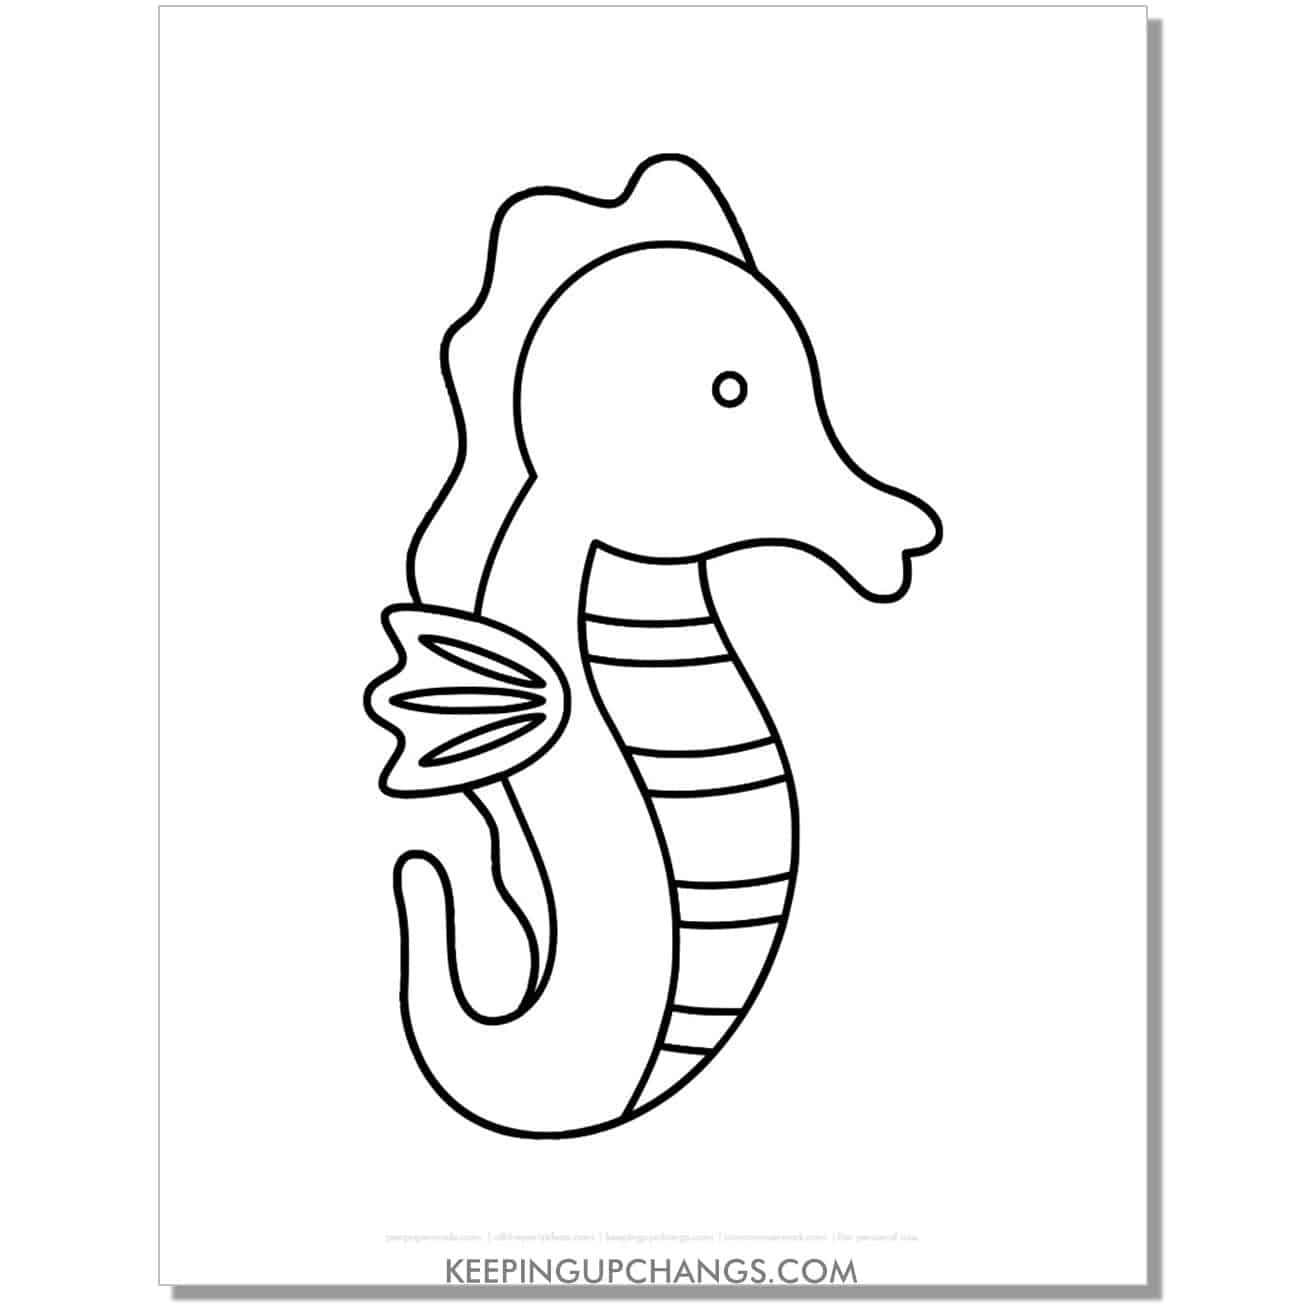 free easy, simple seahorse coloring page, sheet for toddler, preschool